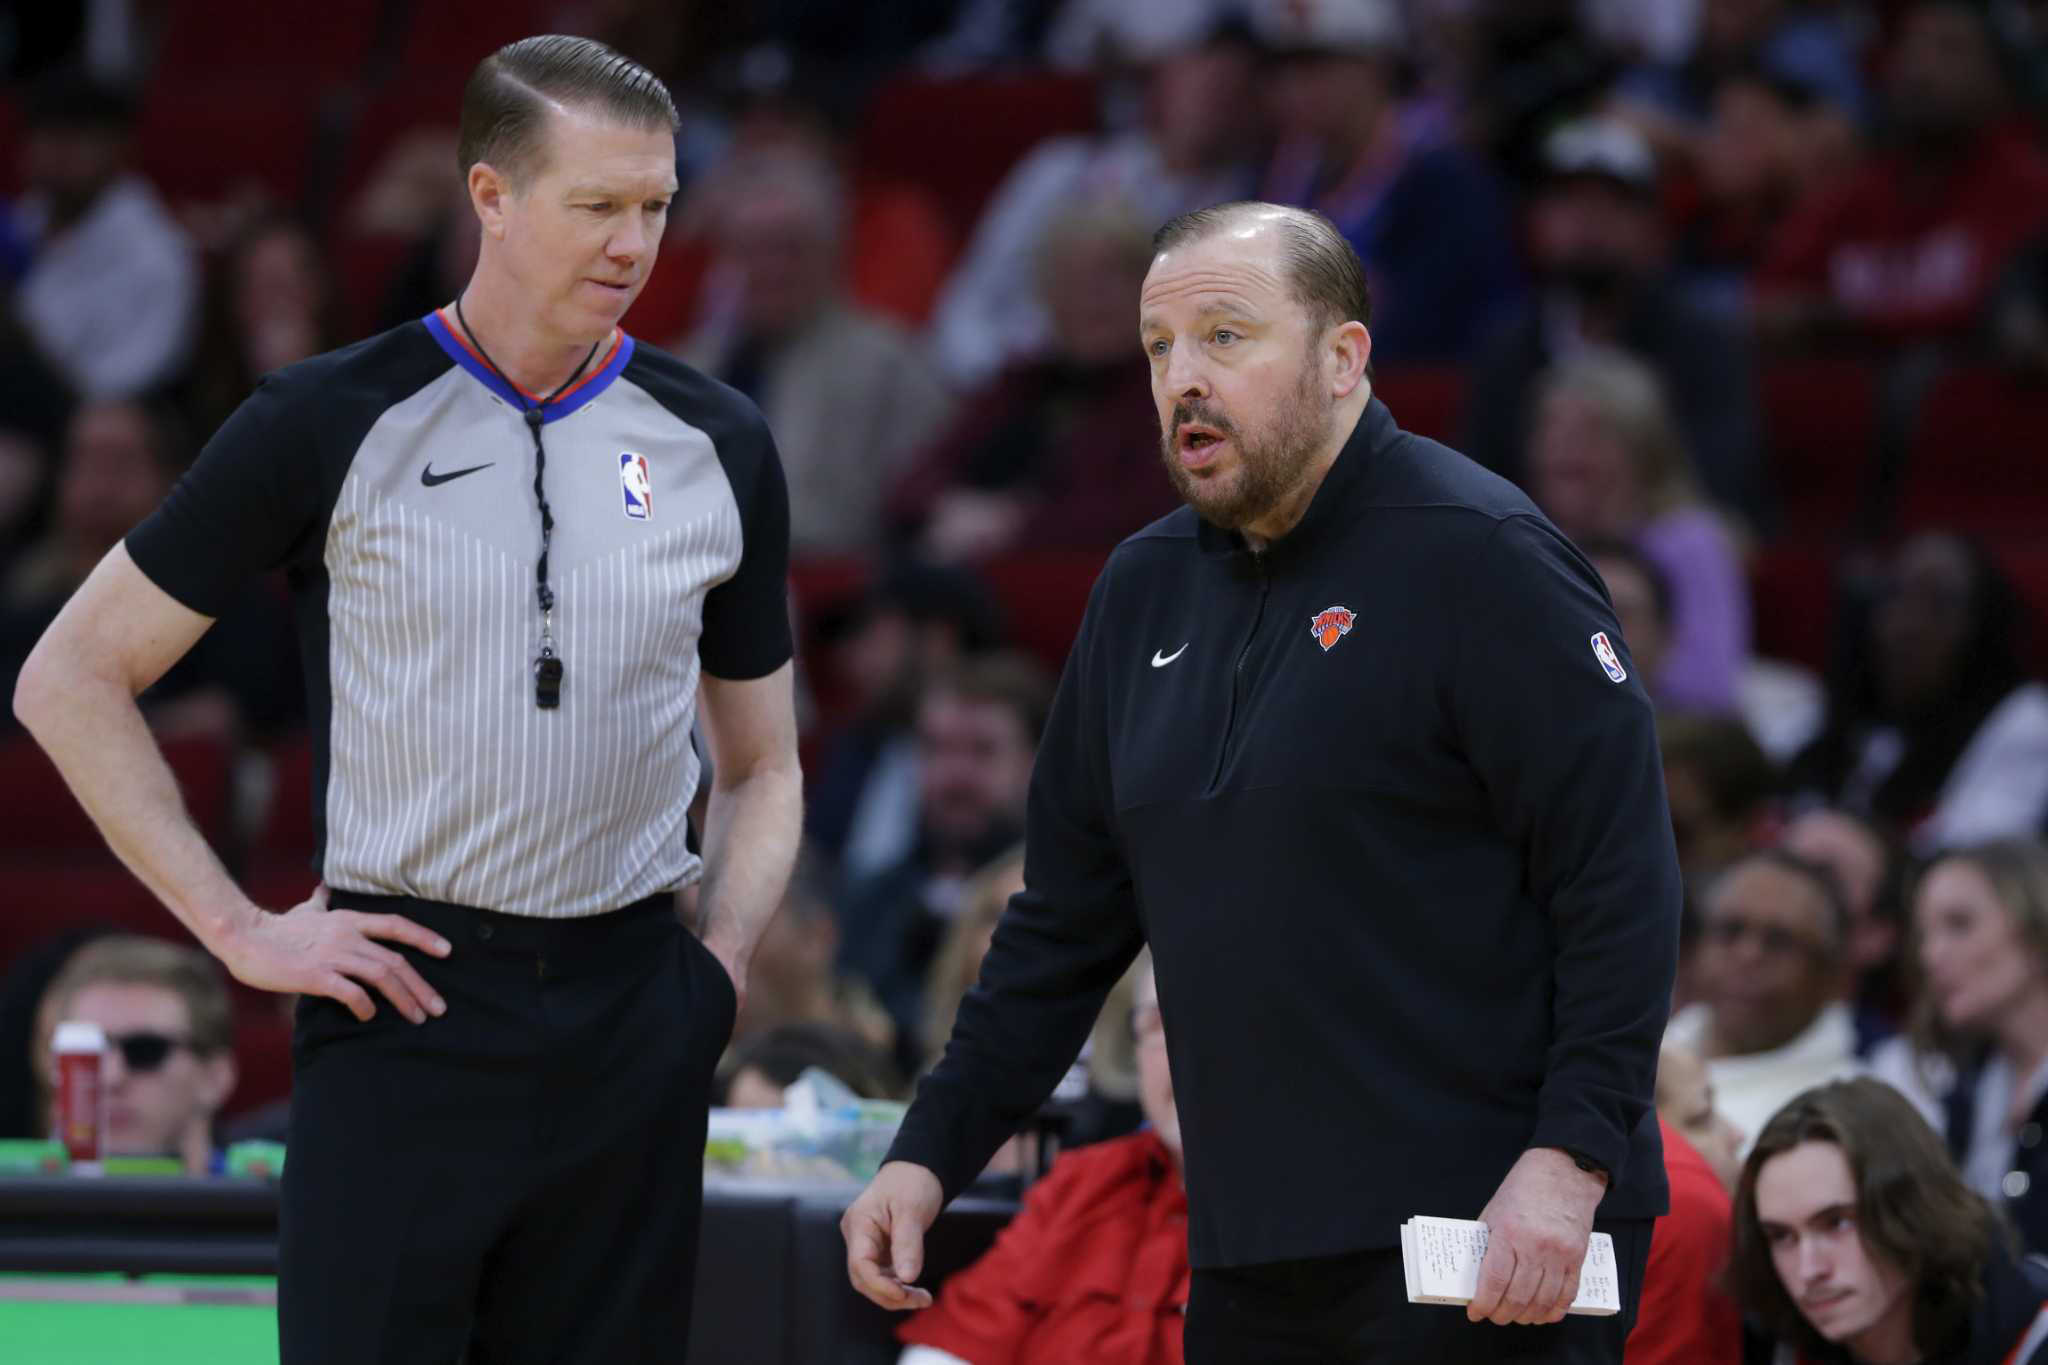 Knicks protest Rockets' win after controversial foul call in final seconds